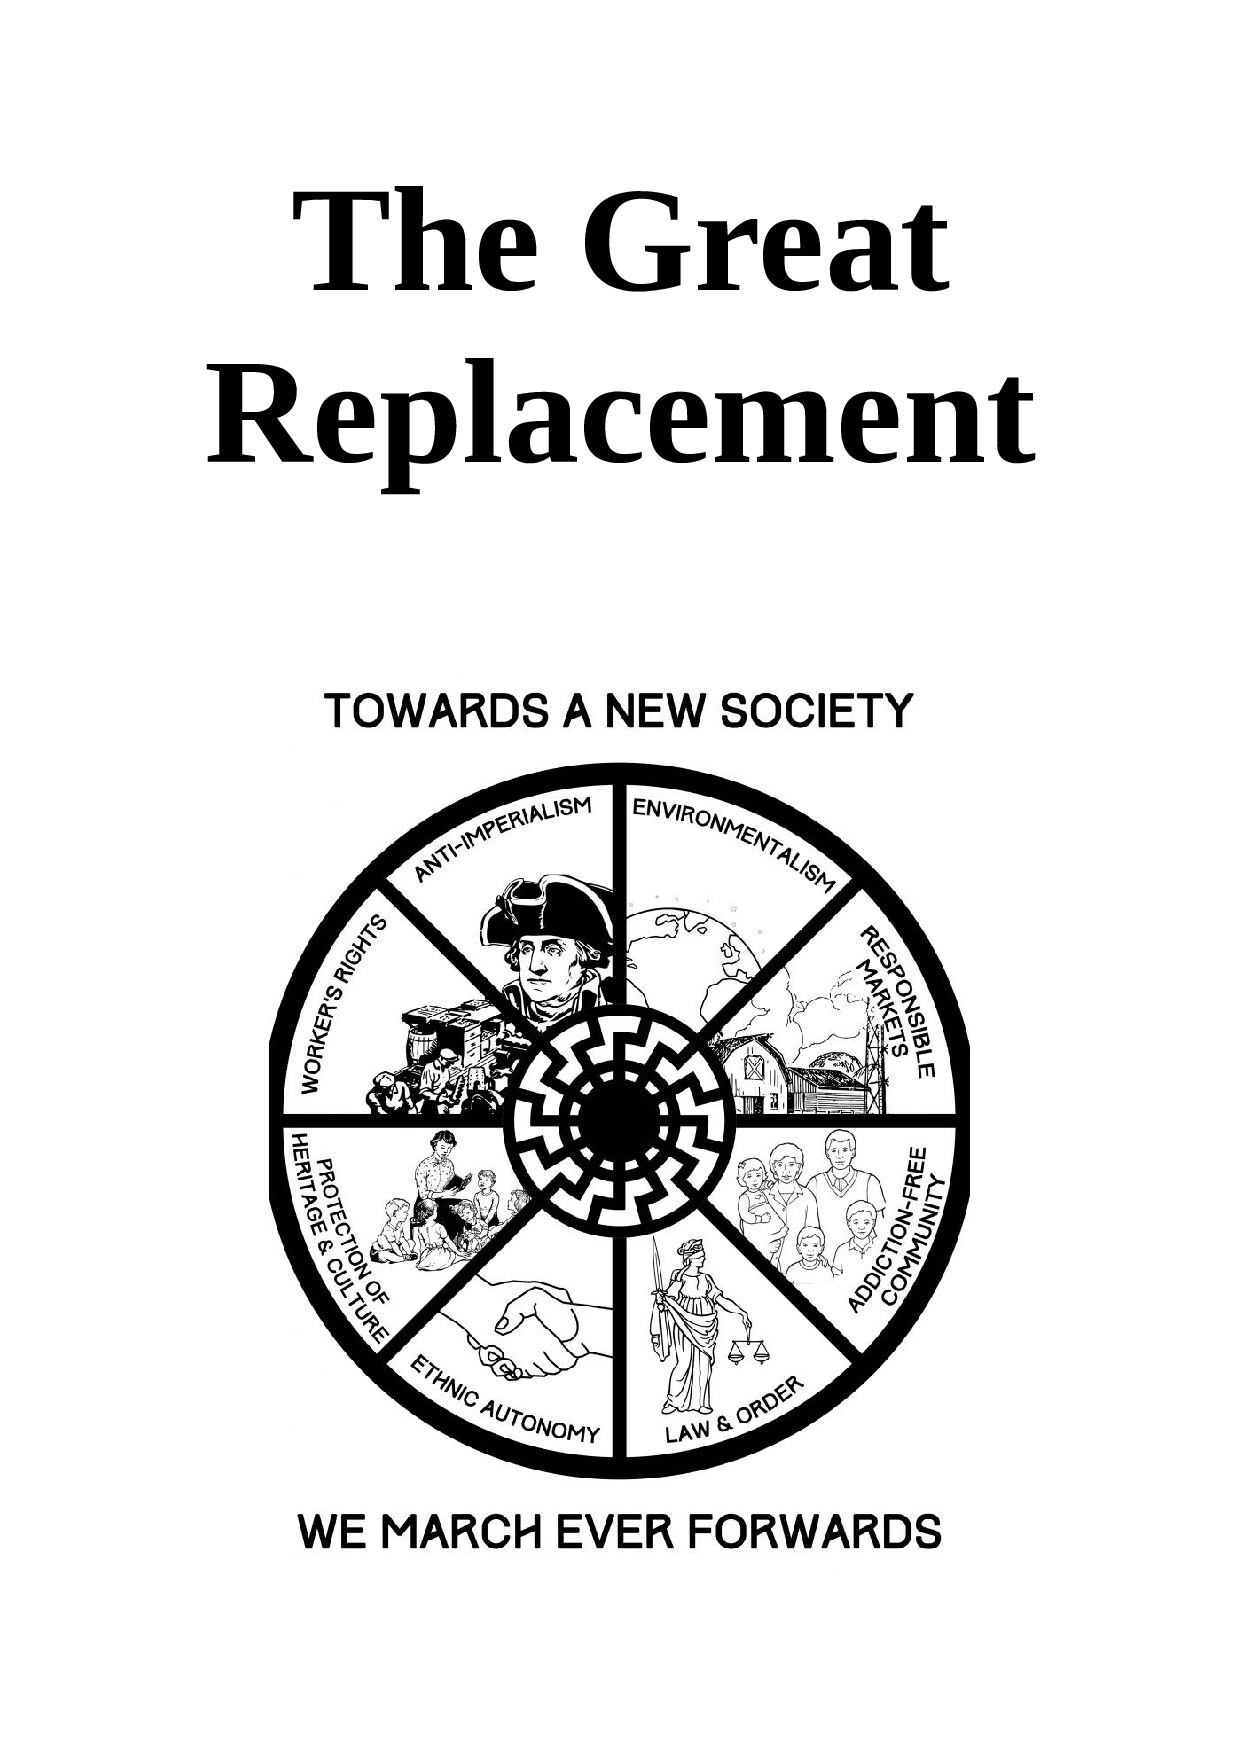 The Great Replacement